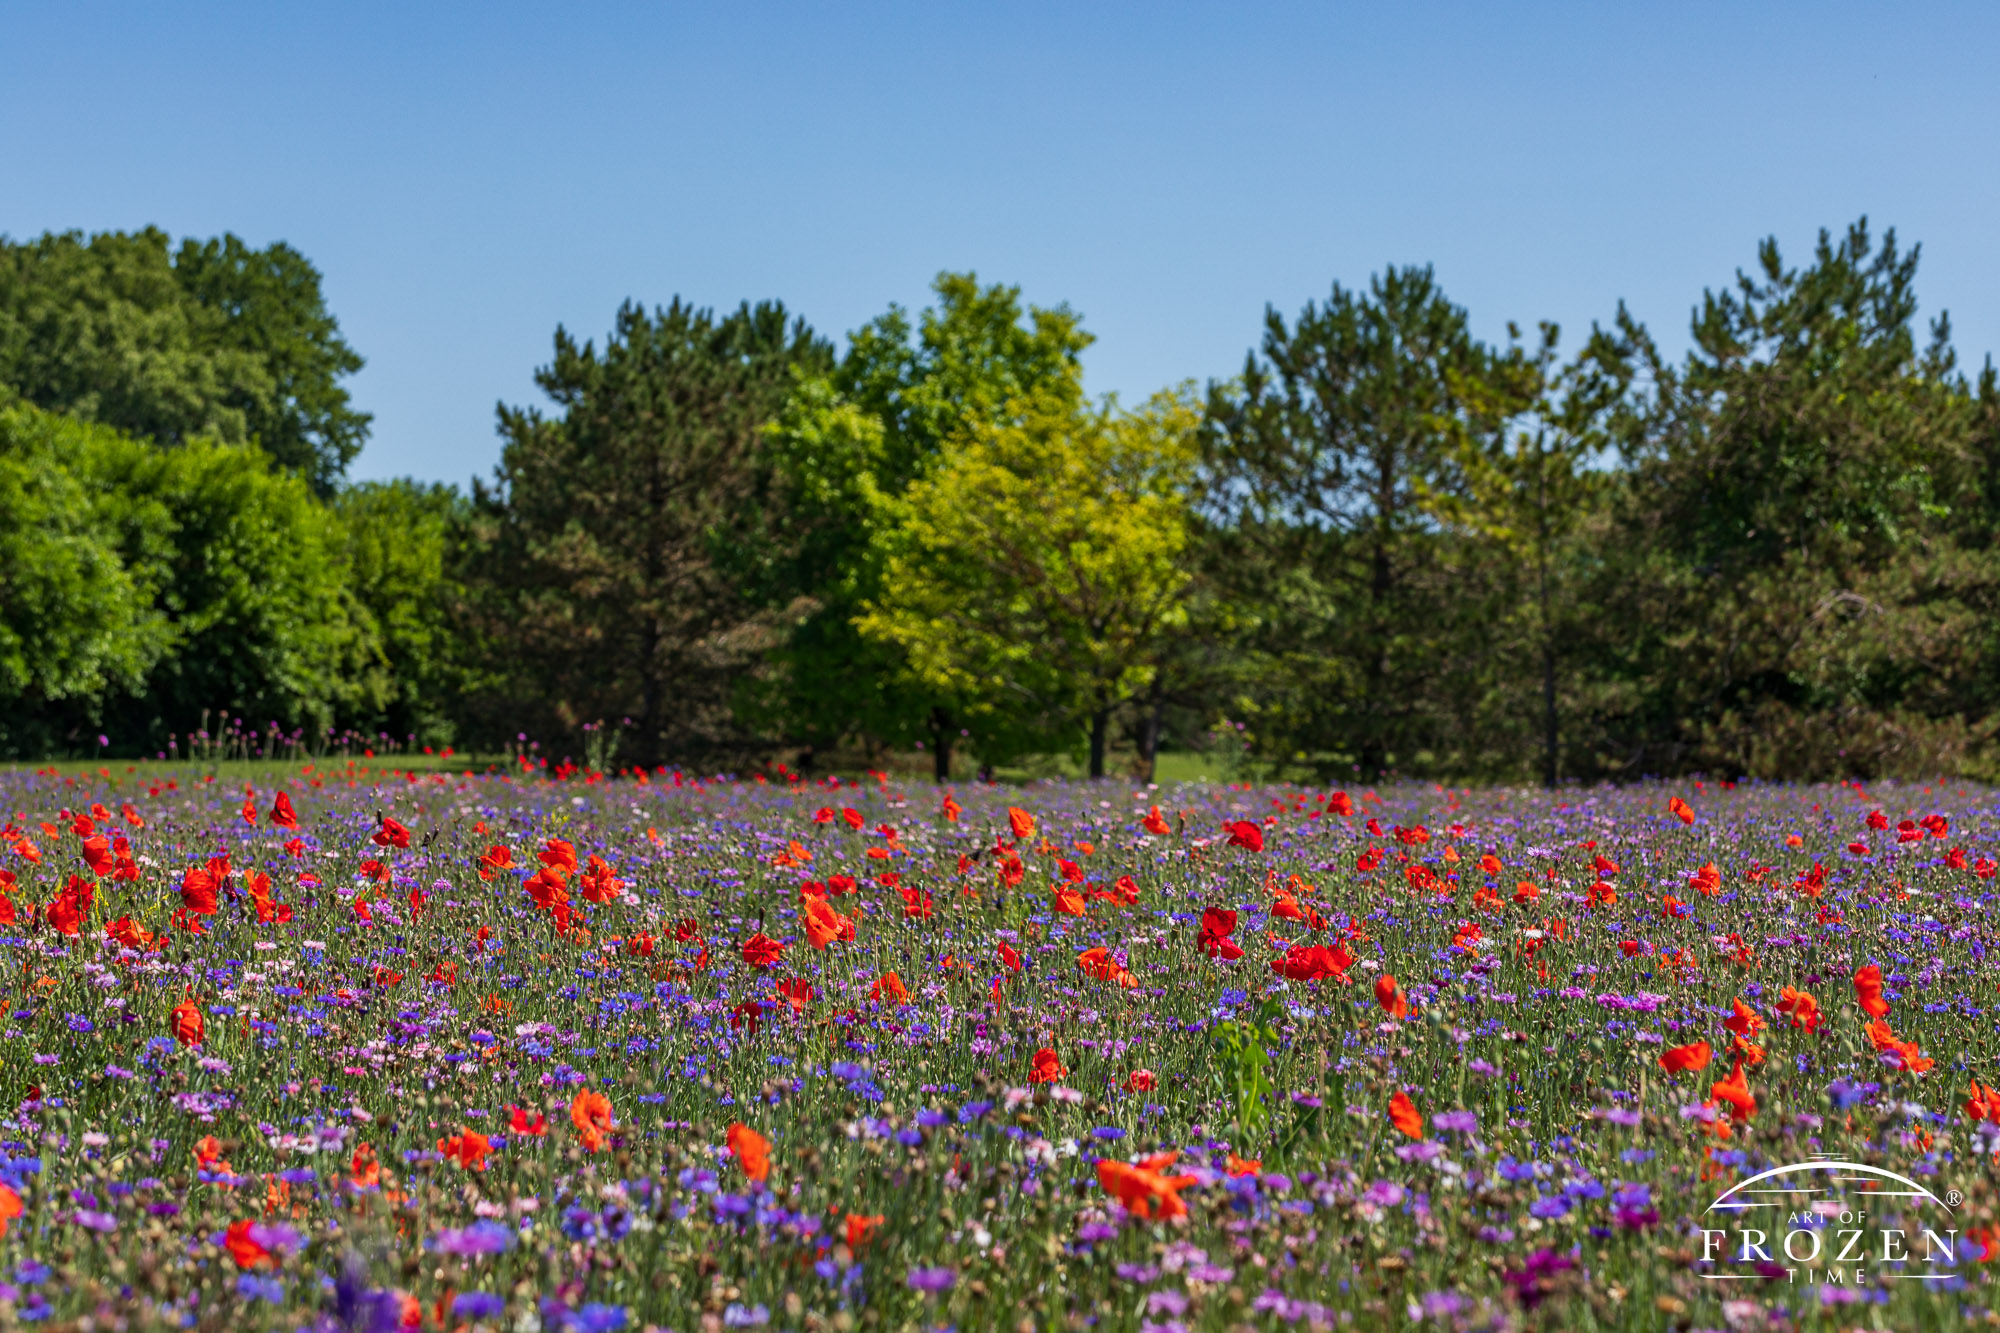 A field of red poppies and pink and purple flowers growing under the summer sun